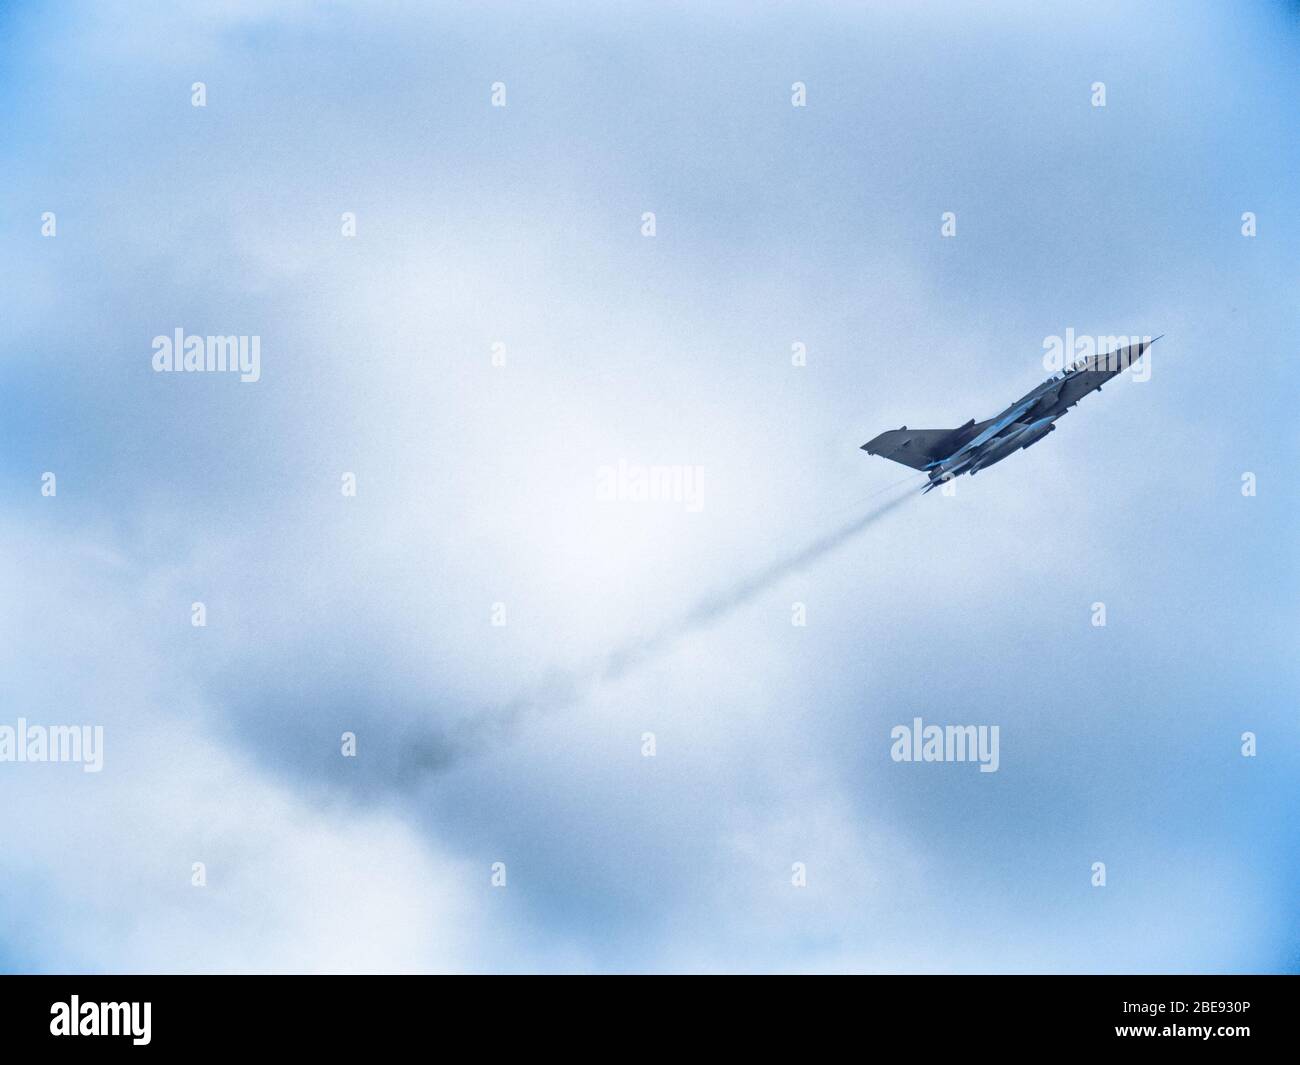 Brescia, Italy - June 10, 2019: Fighter plane speeding through the sky armed with bombs during a military exercise. Stock Photo